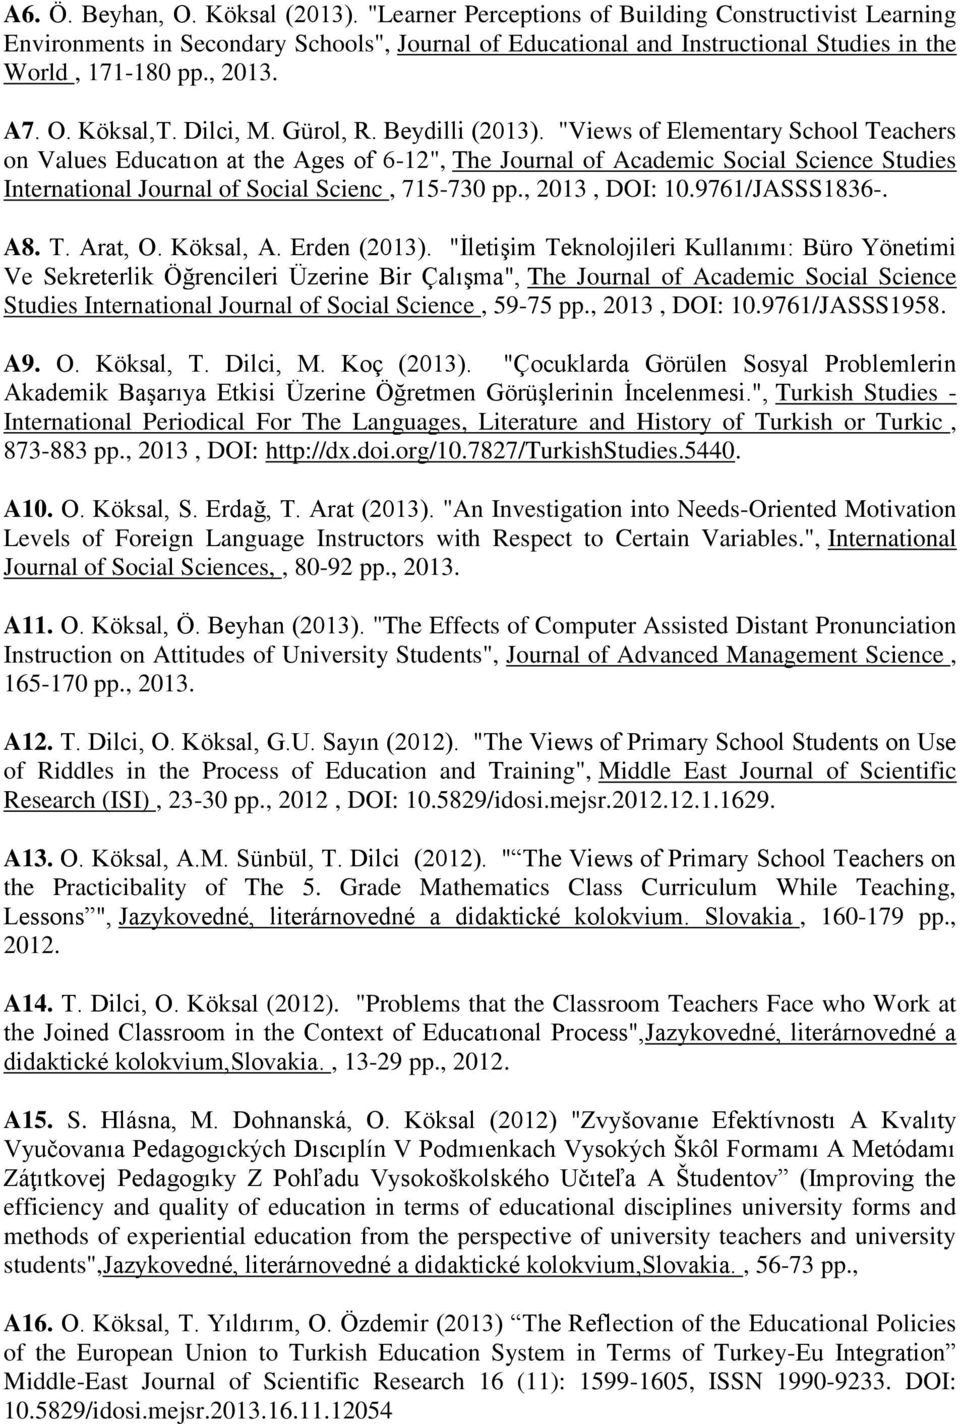 "Views of Elementary School Teachers on Values Educatıon at the Ages of 6-12", The Journal of Academic Social Science Studies International Journal of Social Scienc, 715-730 pp., 2013, DOI: 10.